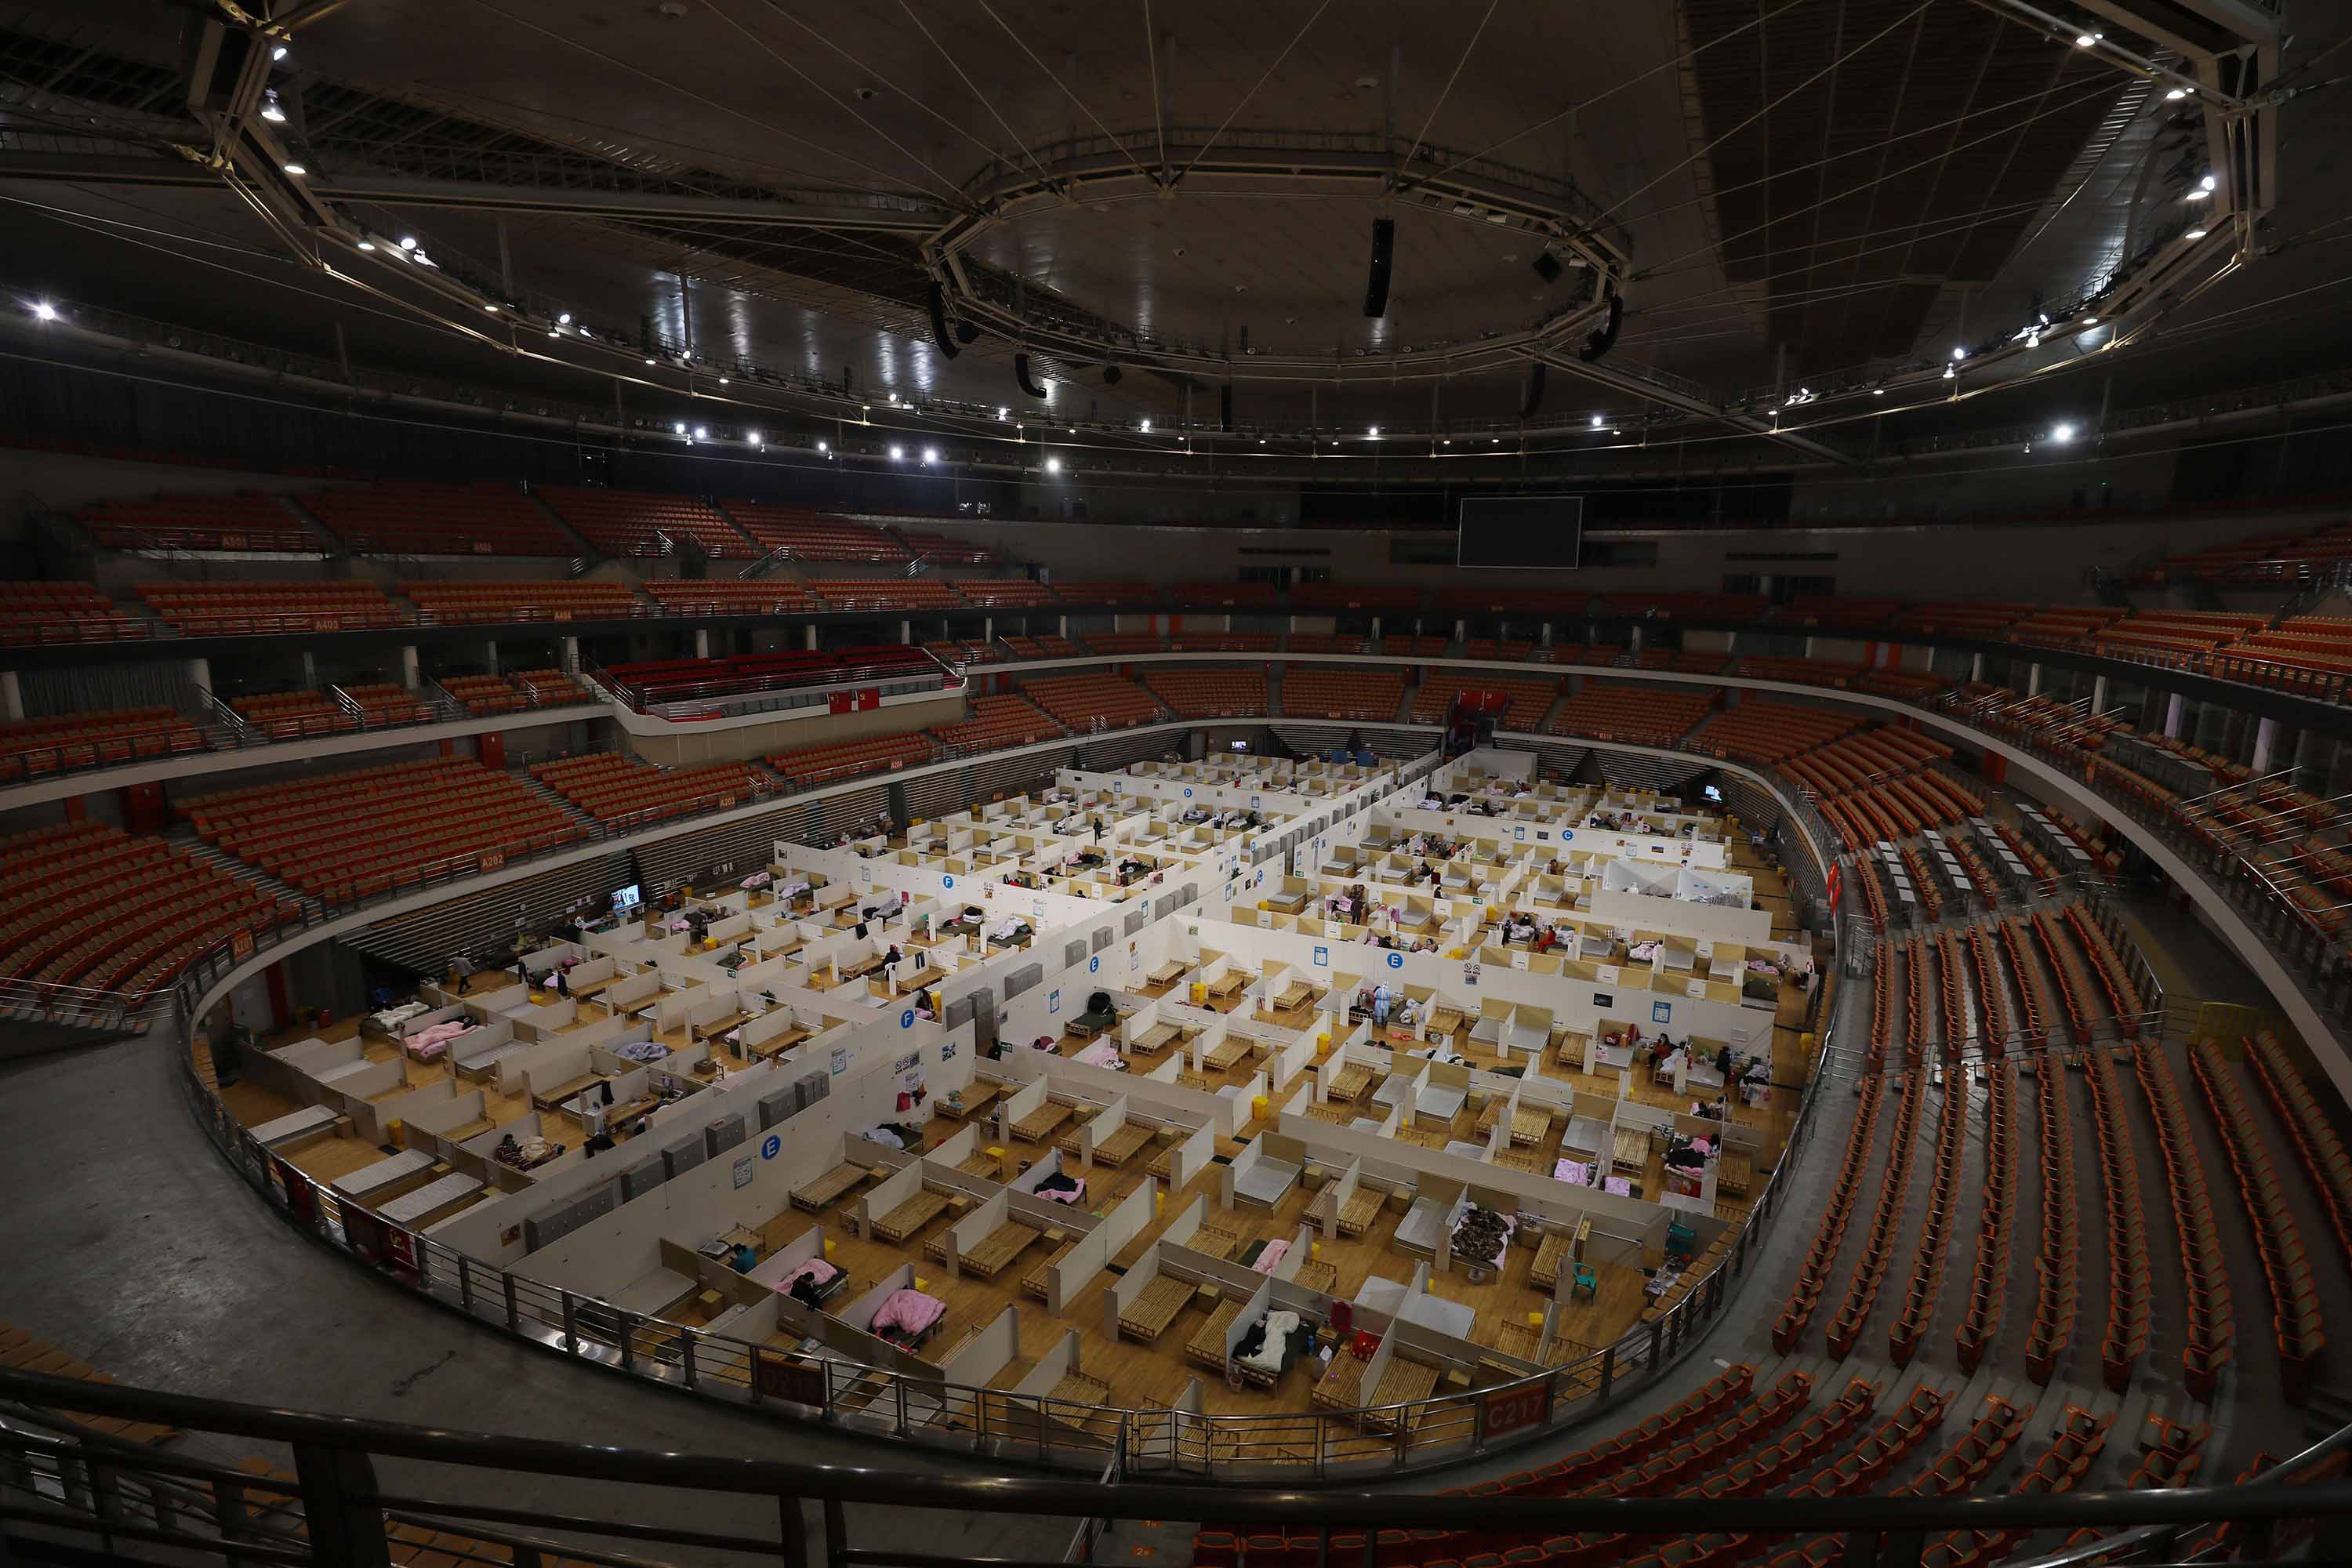 A view of a temporary hospital for coronavirus patients in Wuhan, China, on March 5.